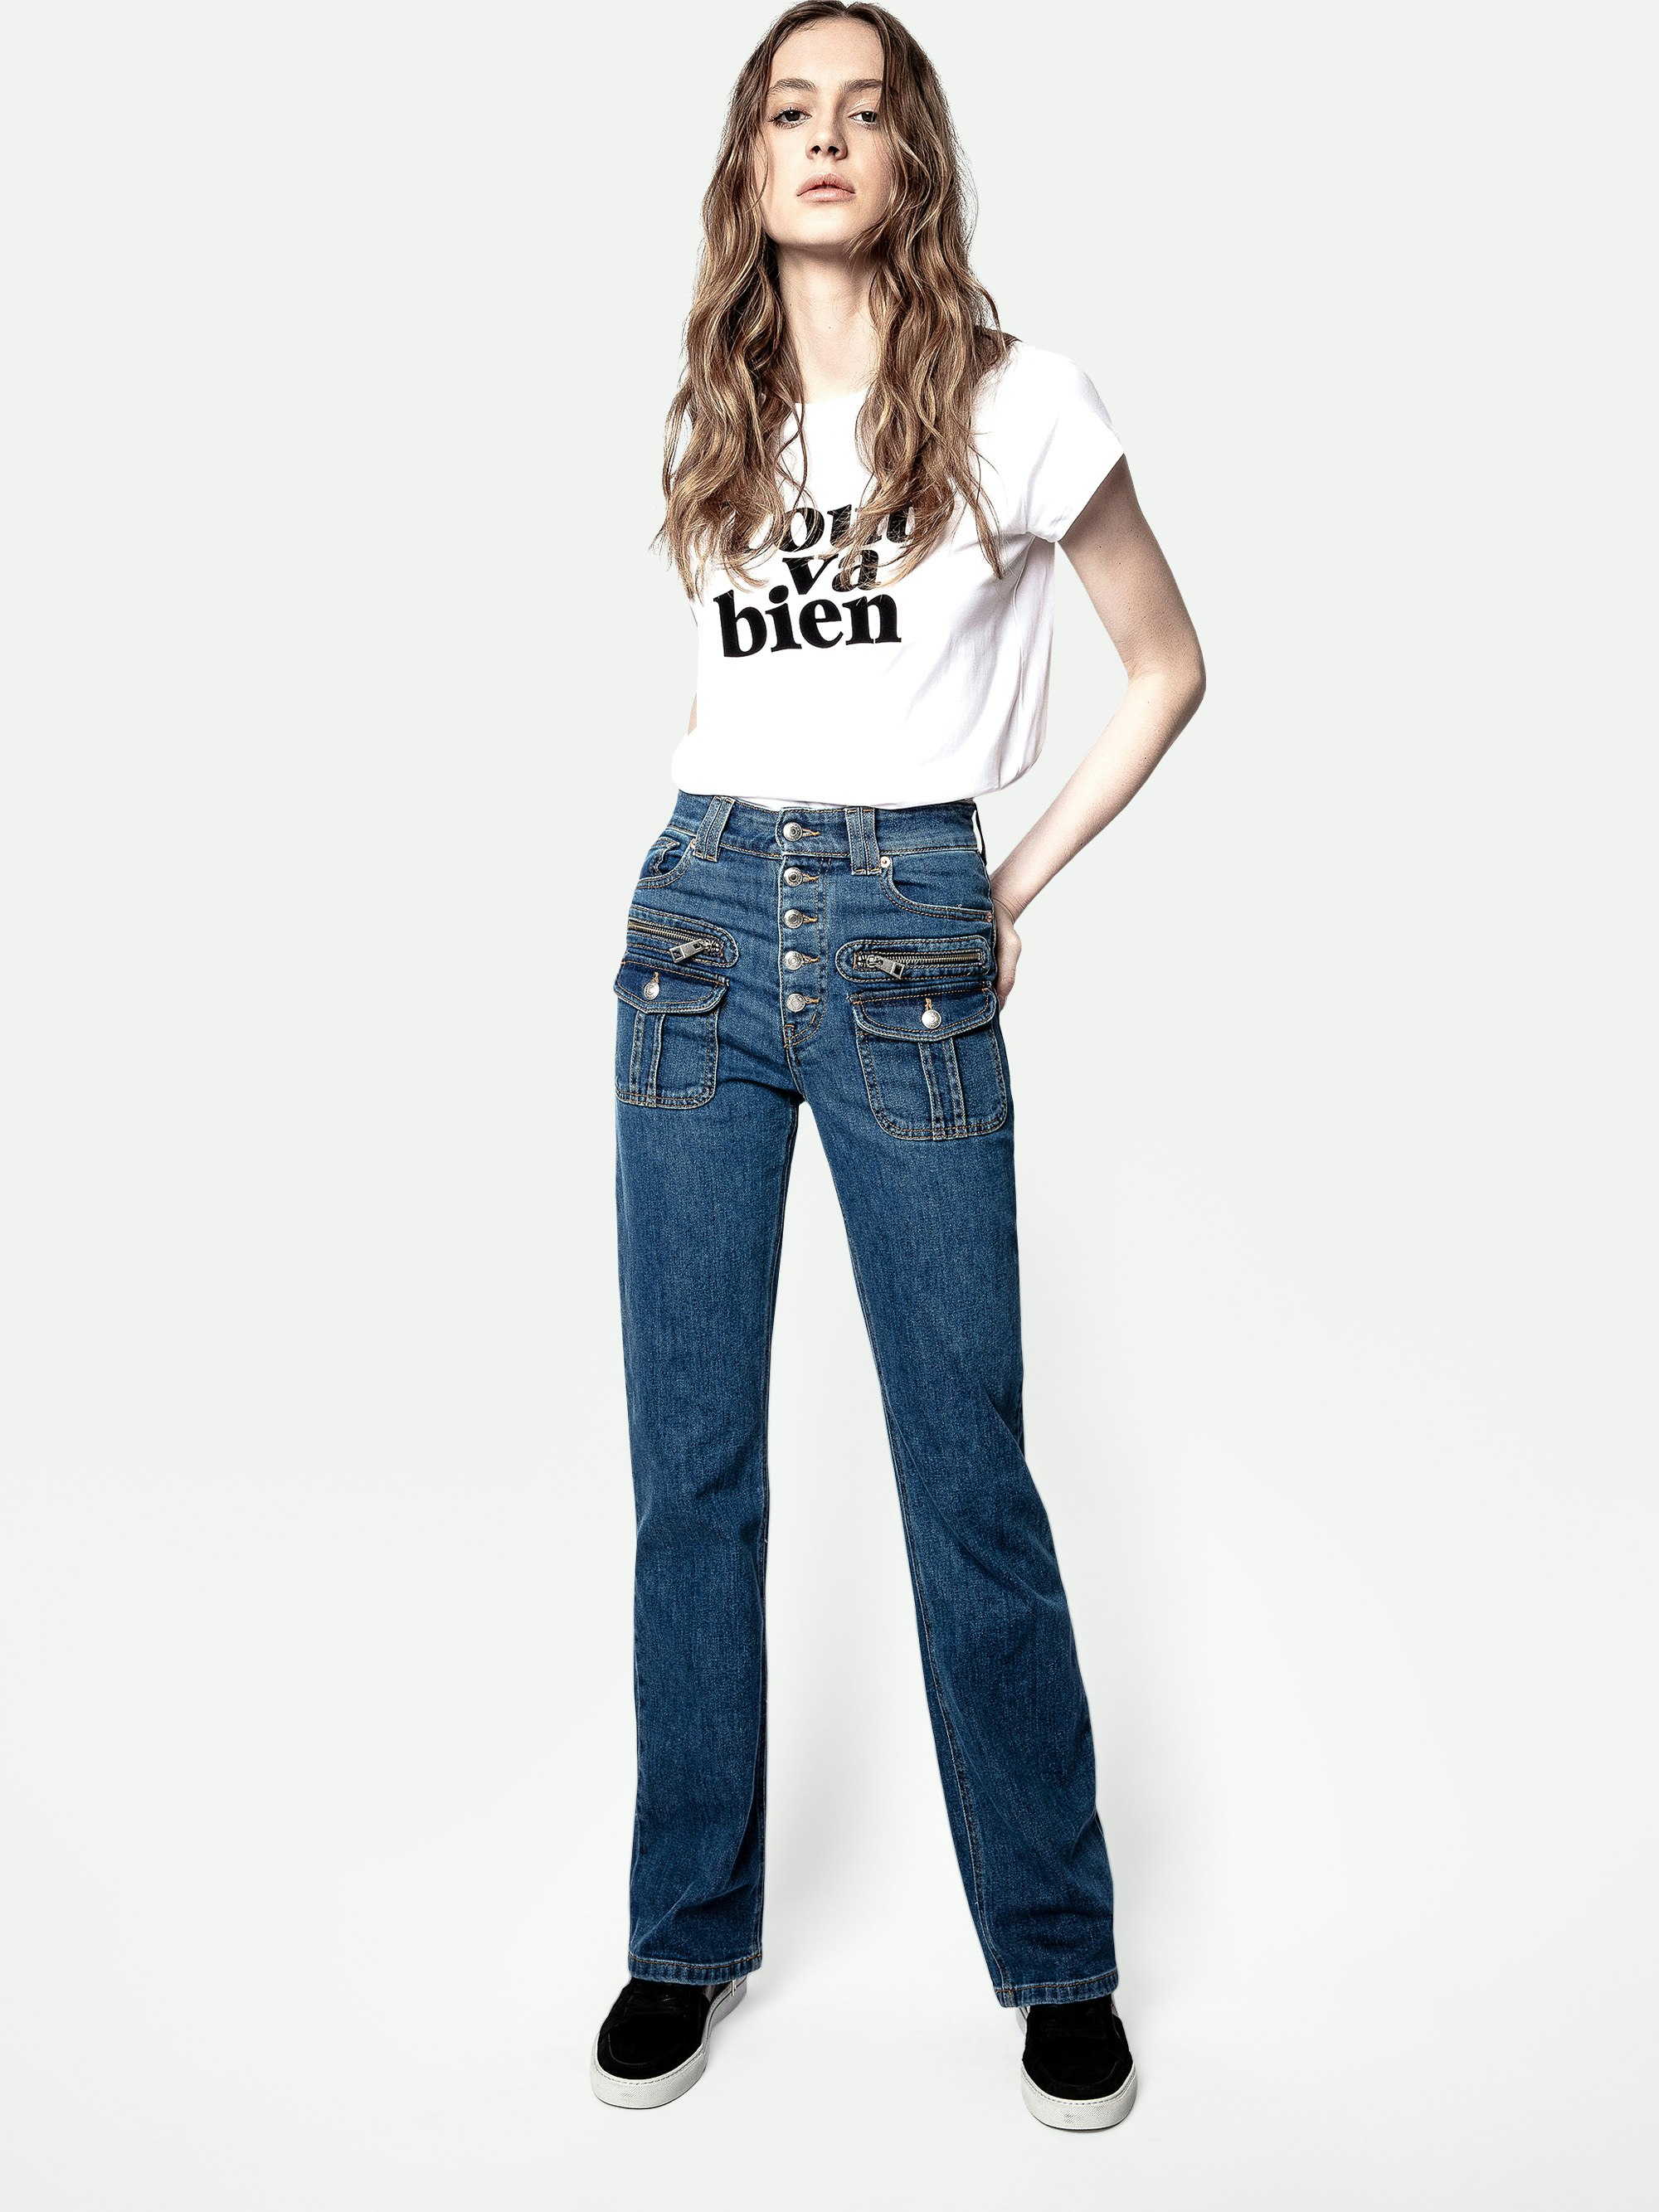 Eyes Show Jeans - Zadig & Voltaire women's high waisted jeans.